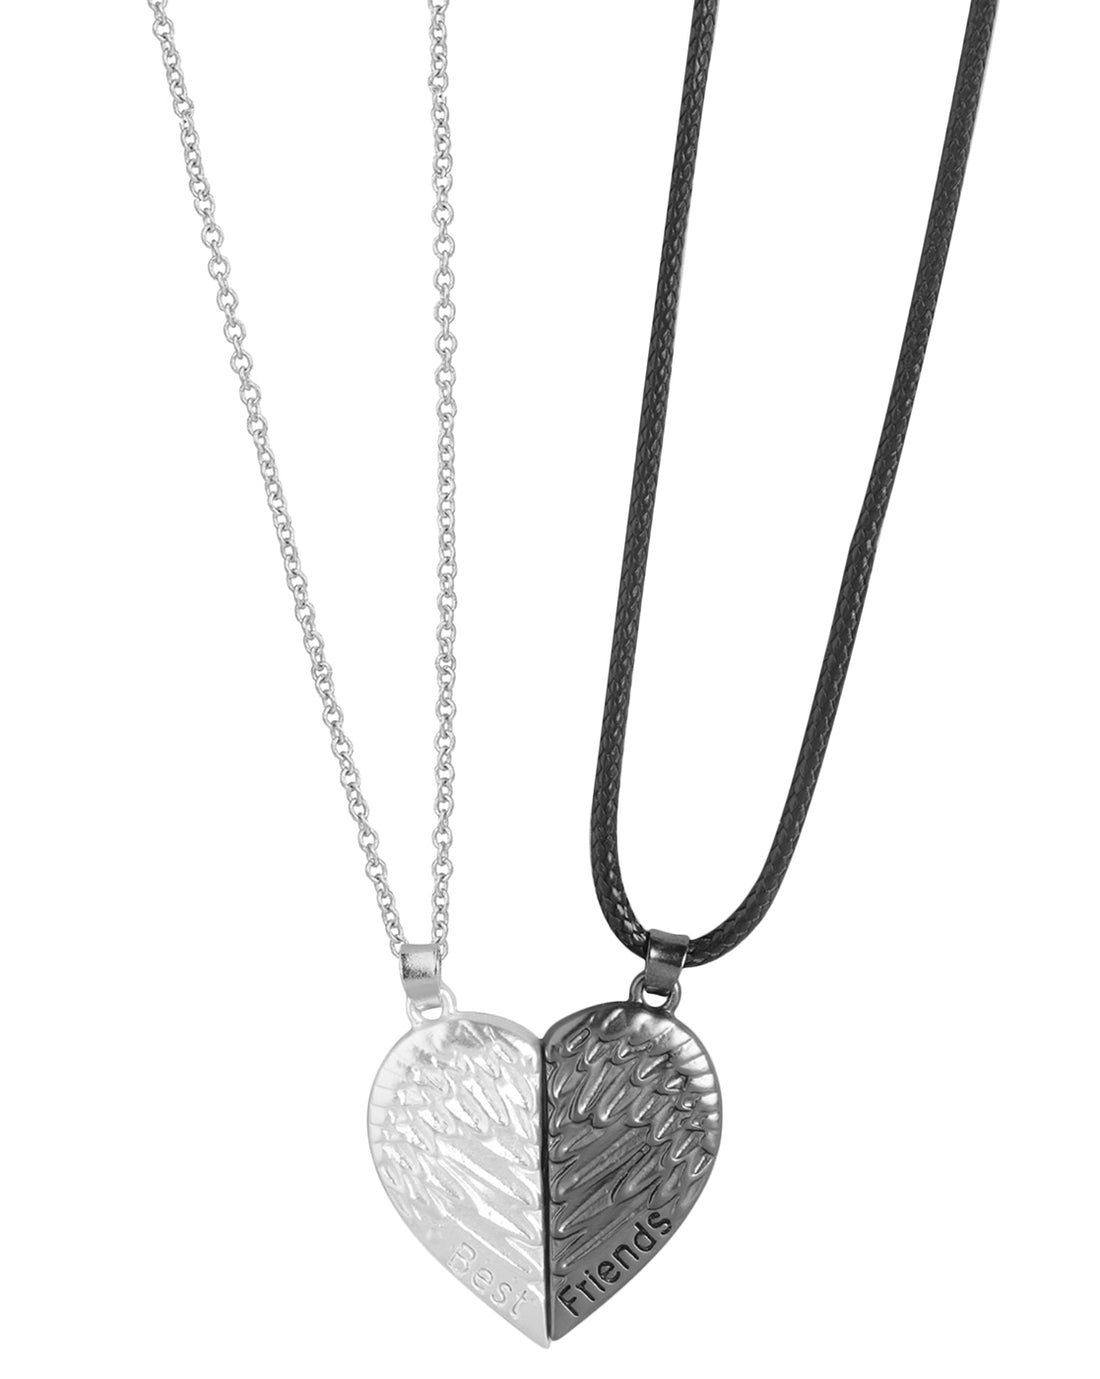 Set of 2 Silver Plated Oxidised Best Friend Broken Heart Pendant with chain for couples